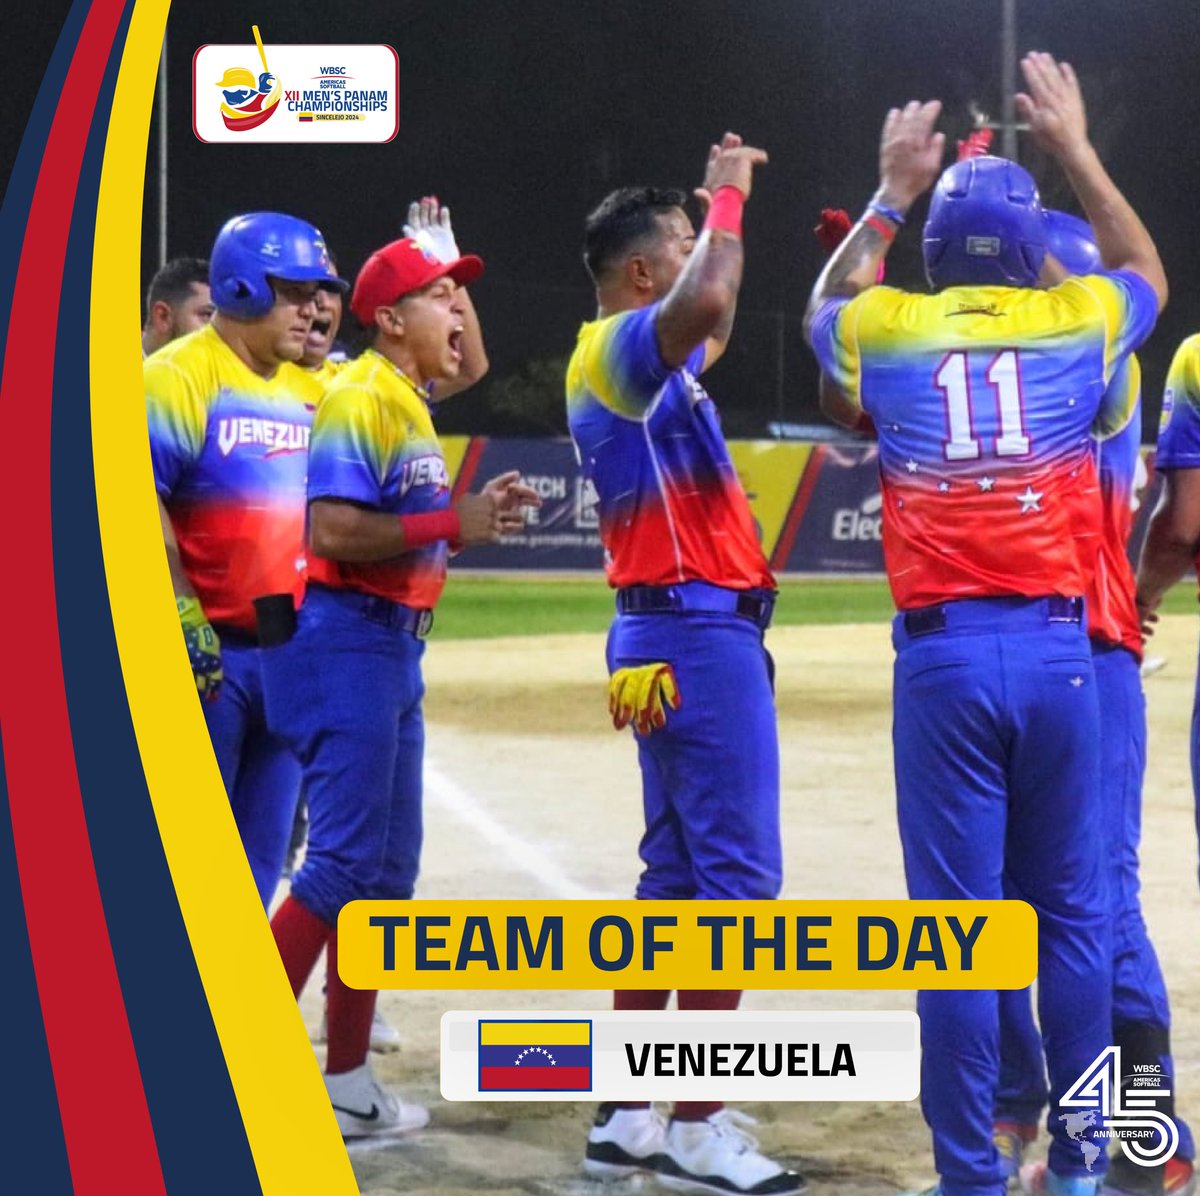 🥇🇻🇪 Venezuela Another fantastic performance by @fevesoftbol They are our @wbscamericas Team of the Day at Mens Panam @wbscamericas . #menspanam #softballpanam #wbscamericas #softballamericas🌎